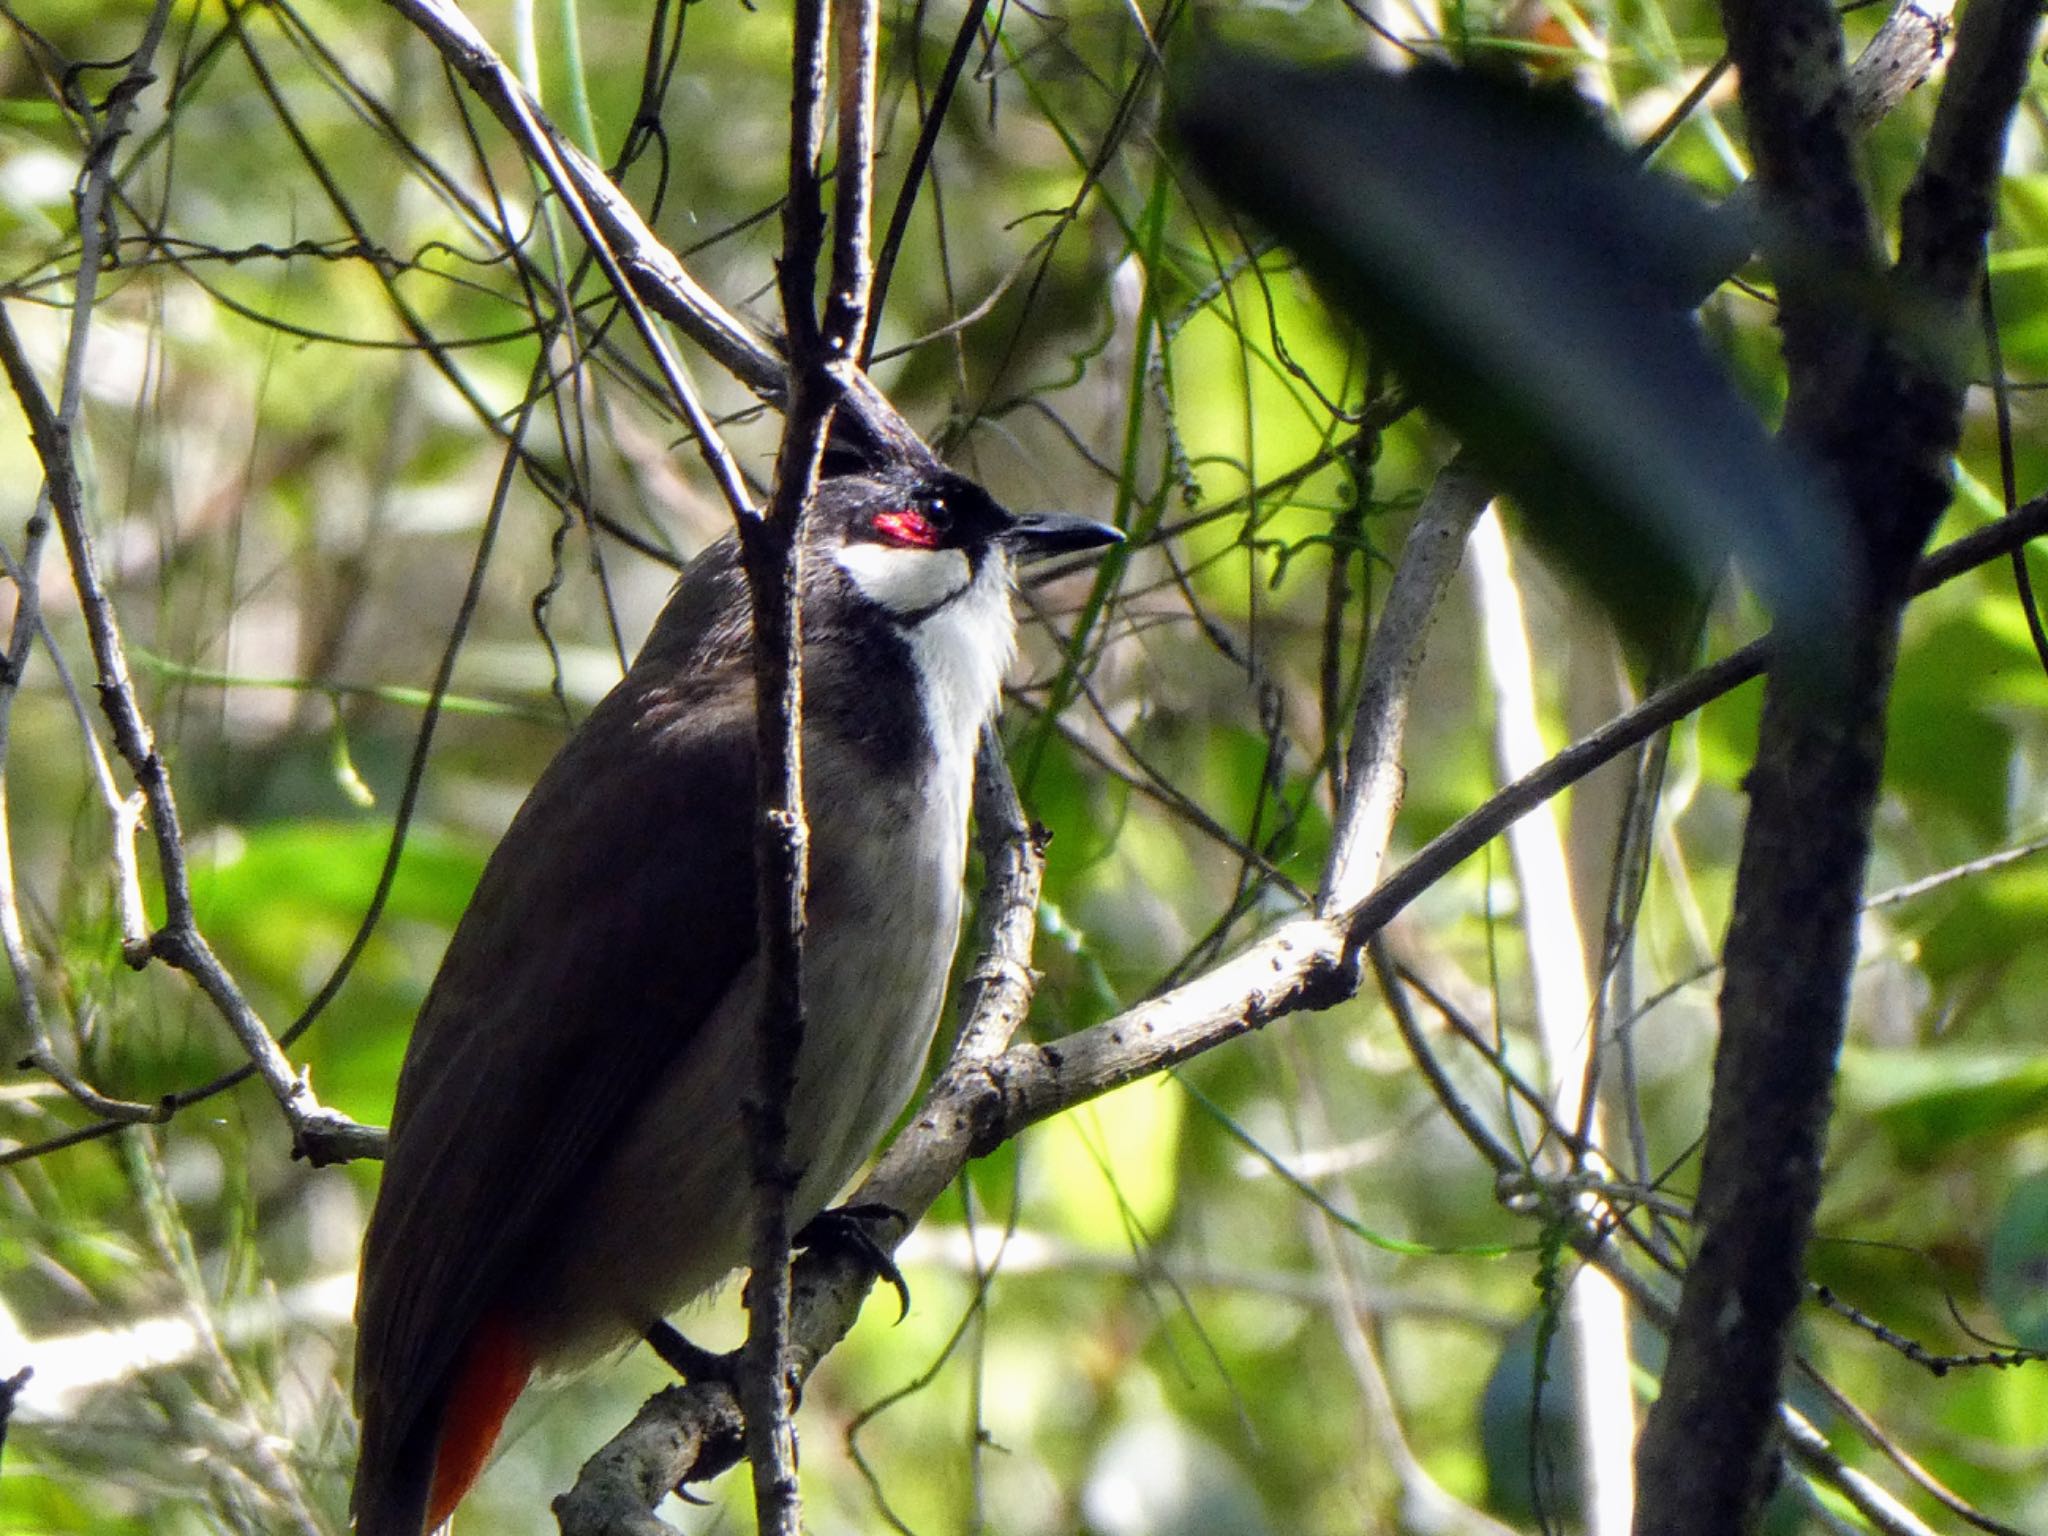 Photo of Red-whiskered Bulbul at Flat Rock Gully, Northbridge, NSW, Australia by Maki